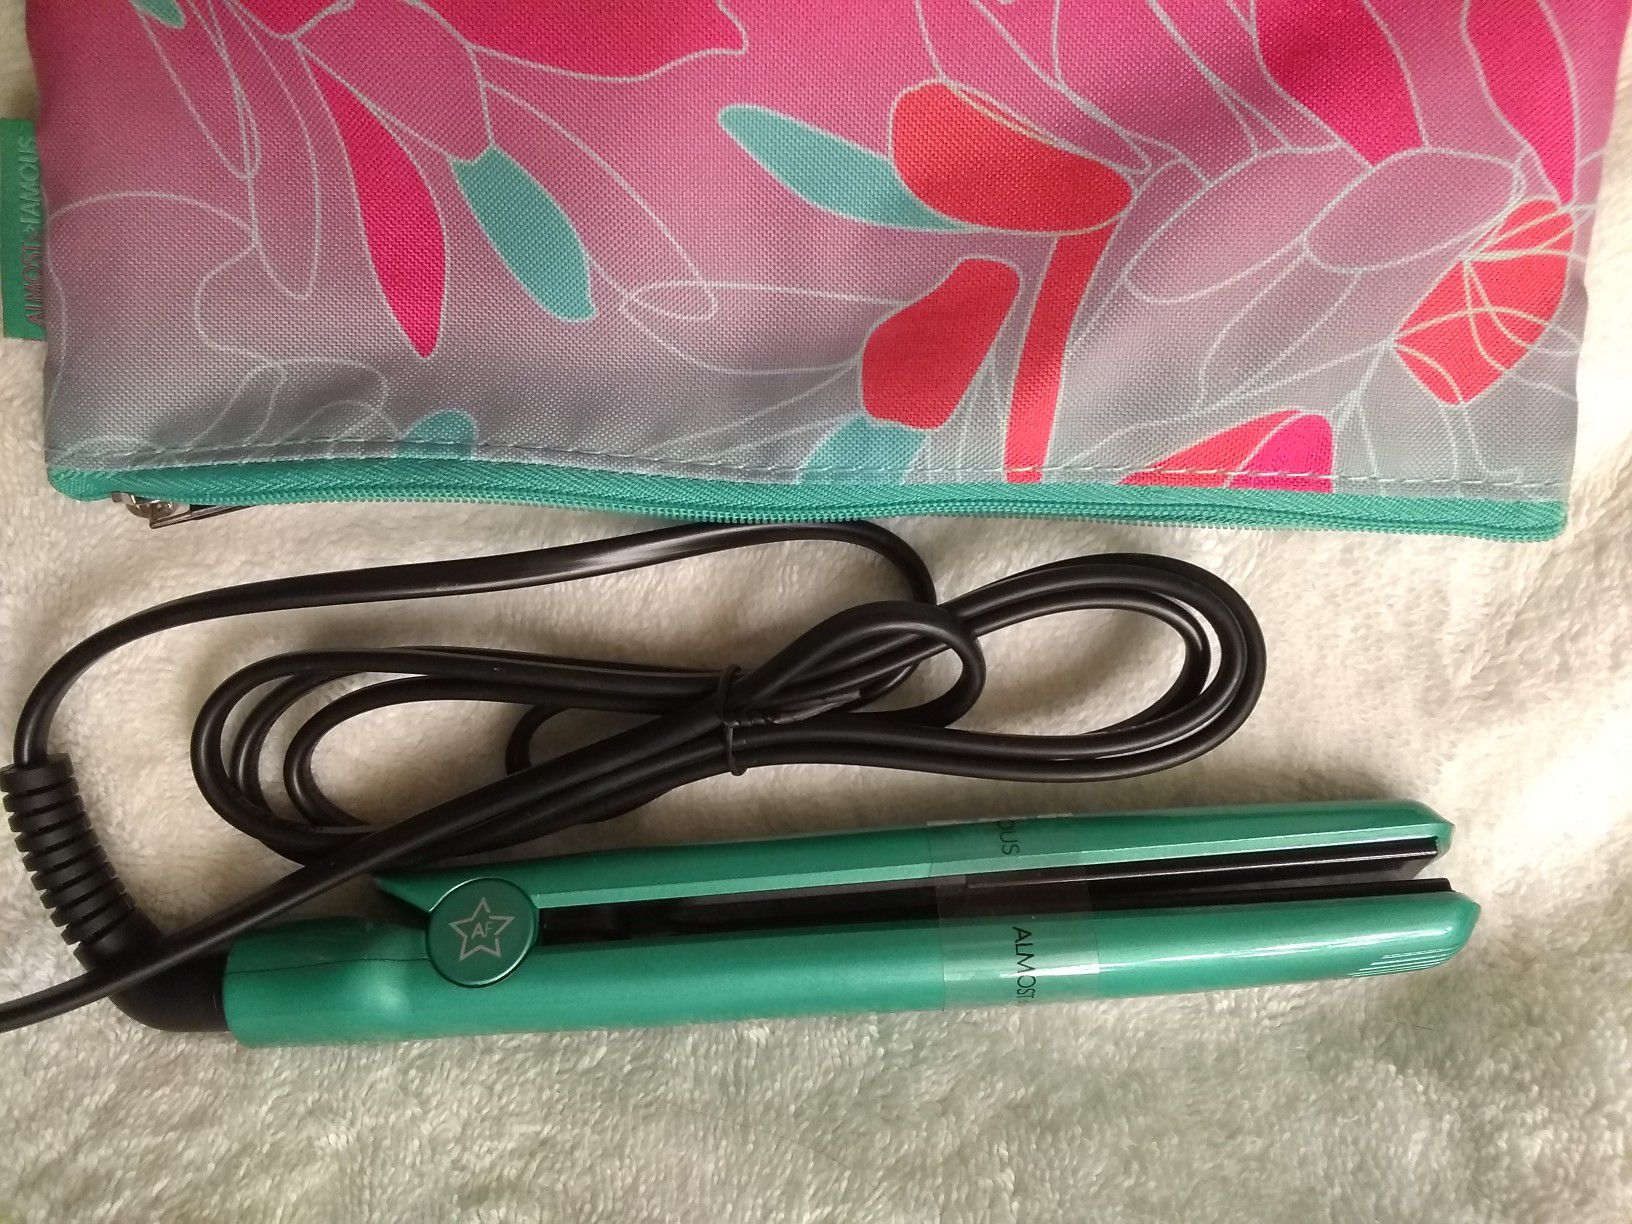 Travel size flat iron with bag. Brand new